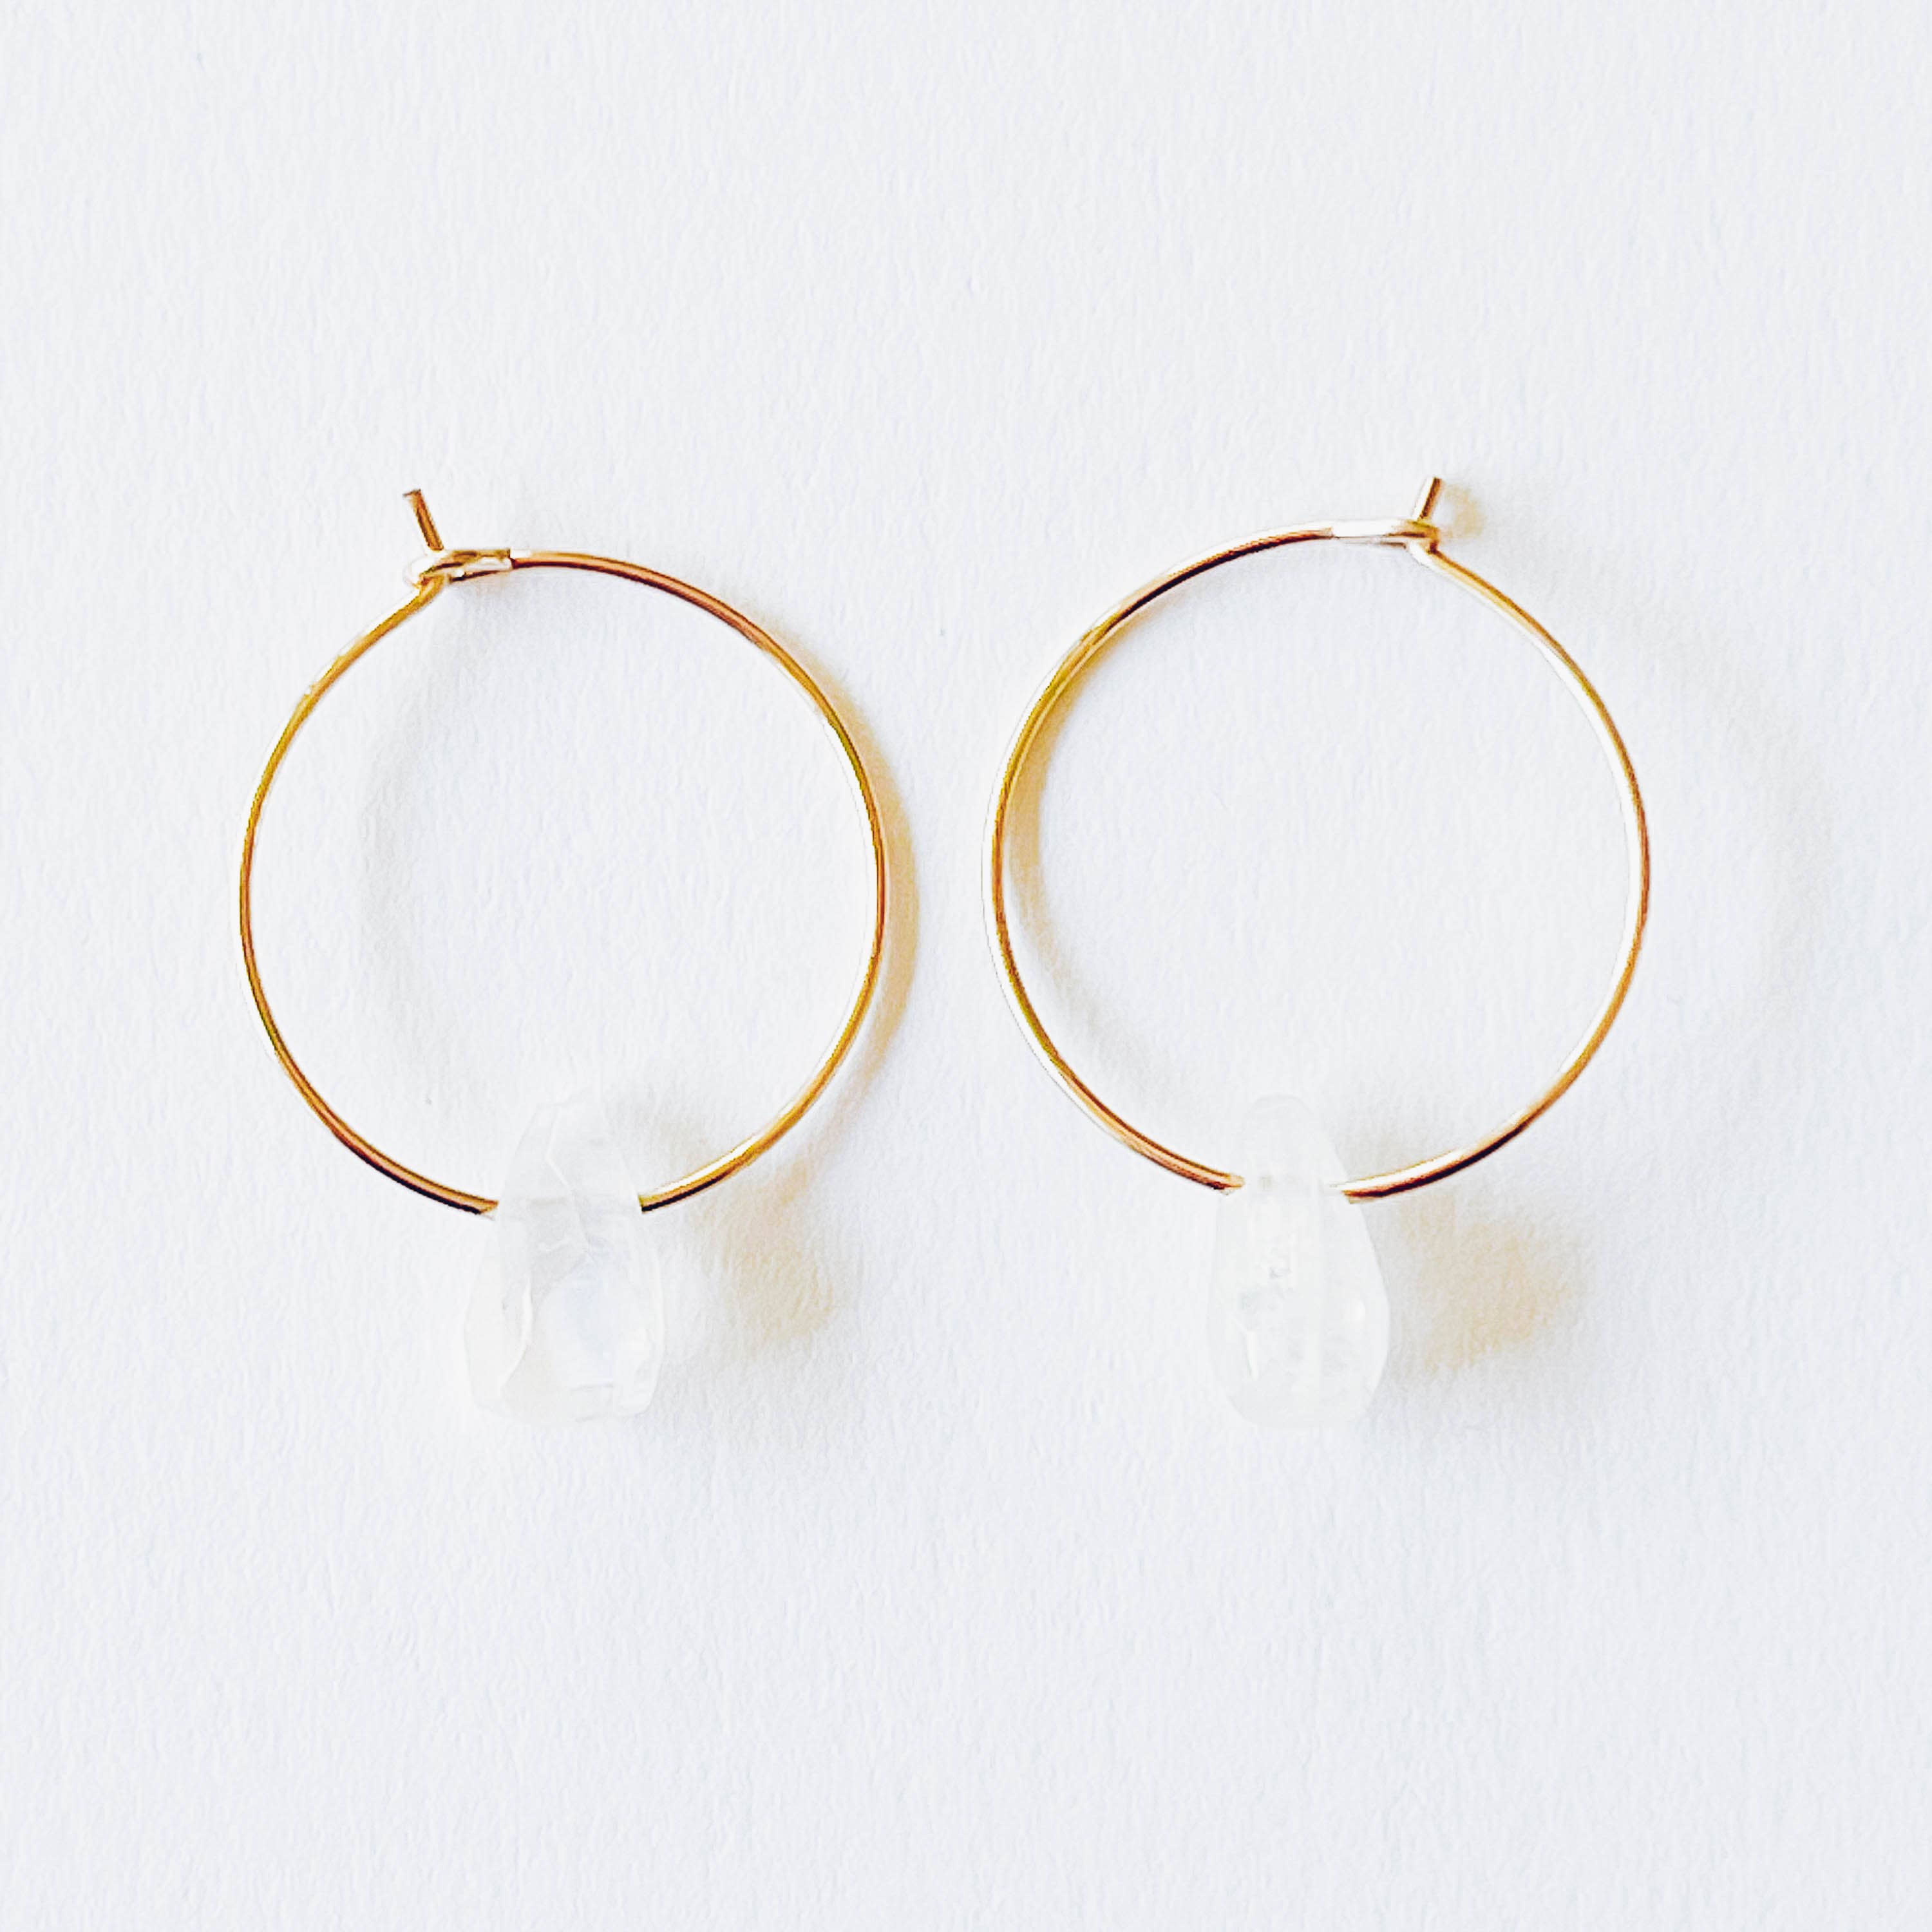 Nest Pretty Things - Gold-Filled Hoops with Moonstones